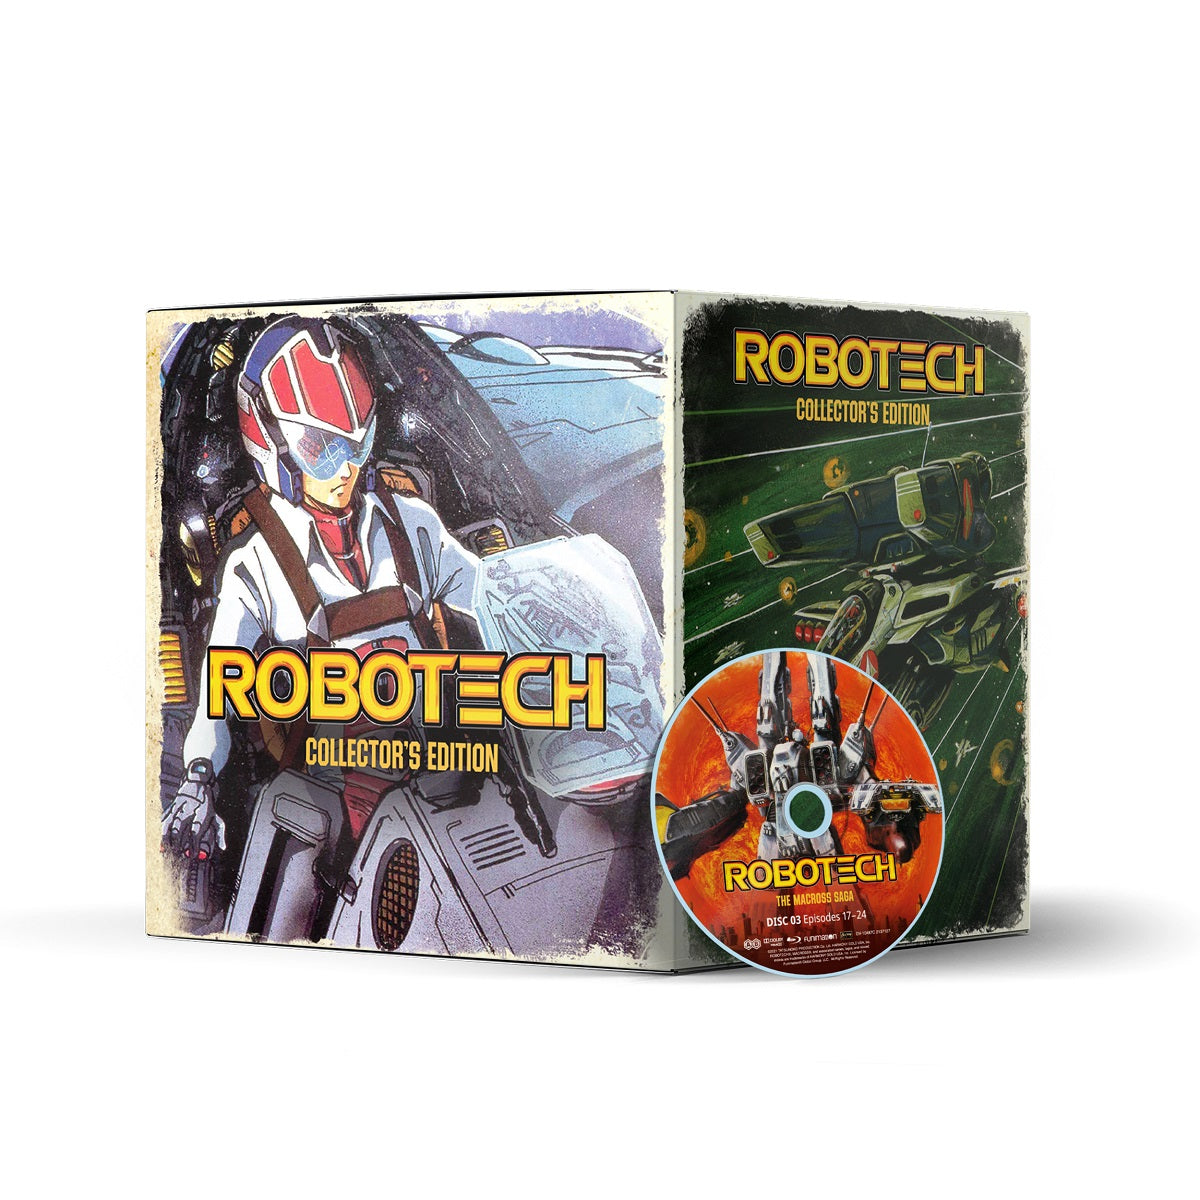 🔥 Robotech - The Complete Series Collector's Edition Blu-ray 🔥